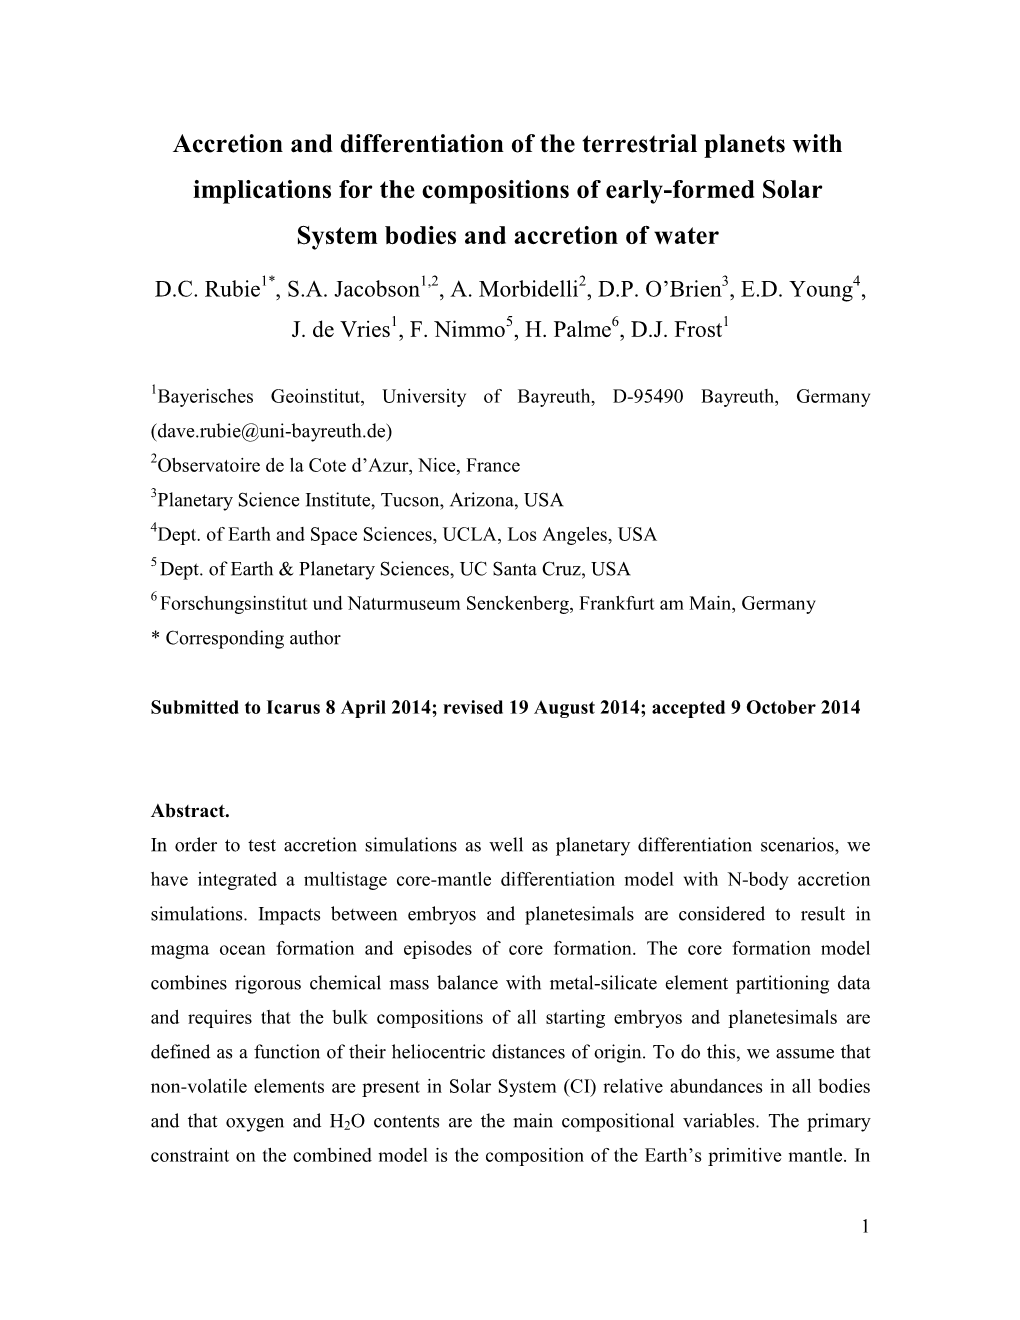 Accretion and Differentiation of the Terrestrial Planets with Implications for the Compositions of Early-Formed Solar